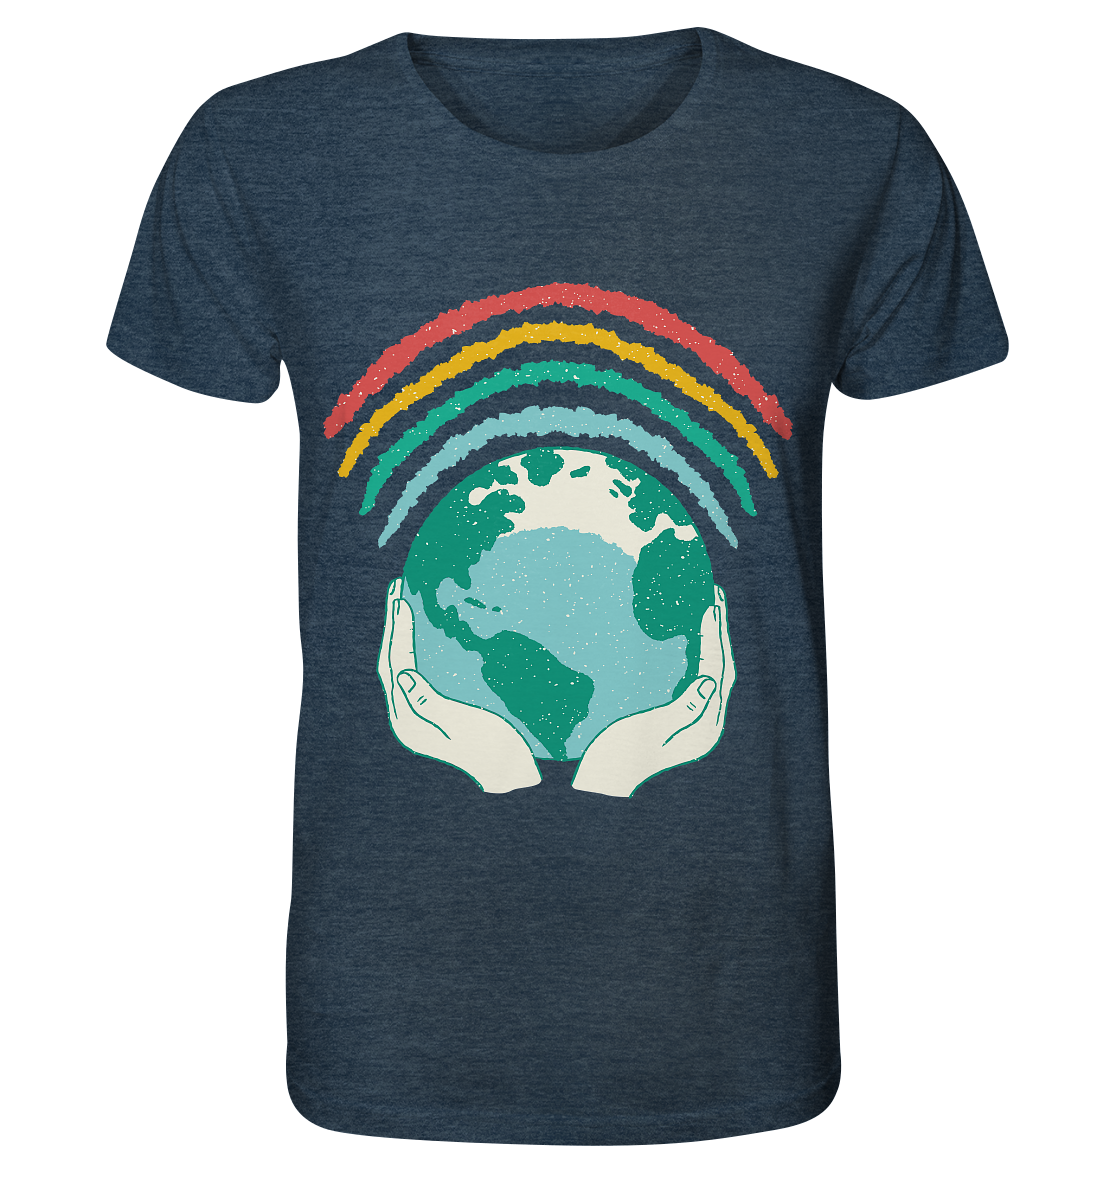 Rainbow with globe in hands - Organic Shirt (mottled)